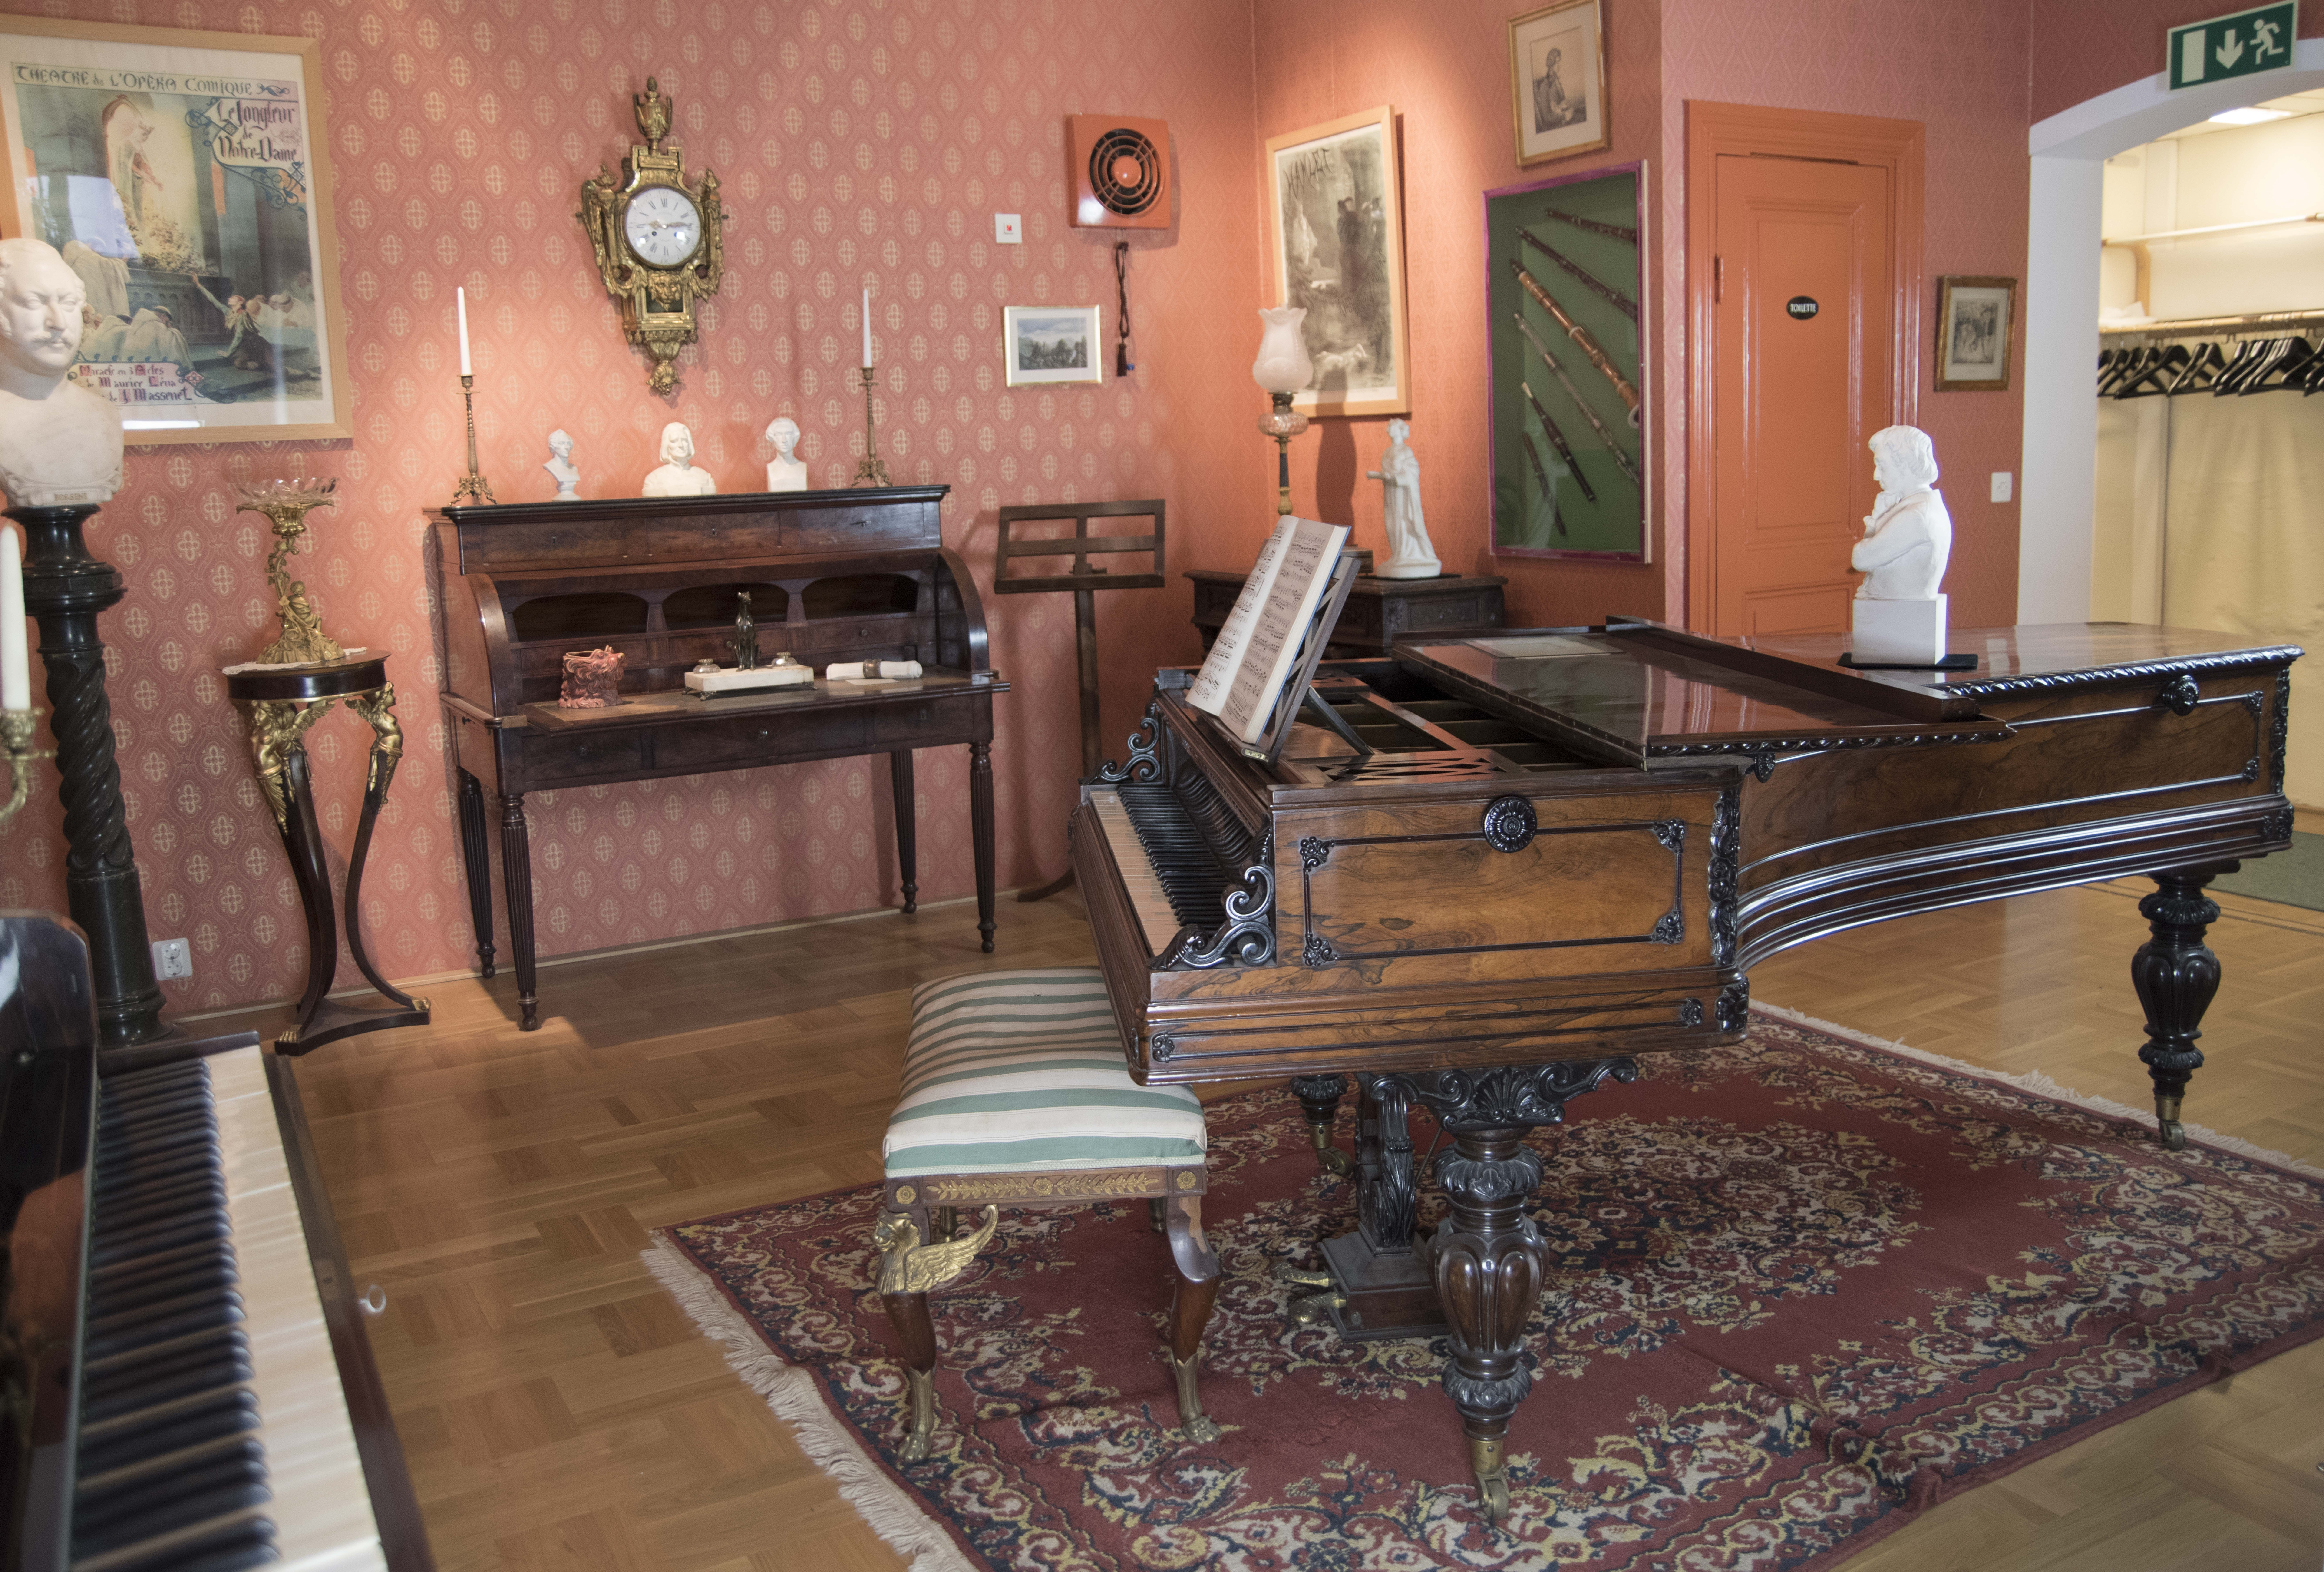 Nydahl Collection, 19th Century Room